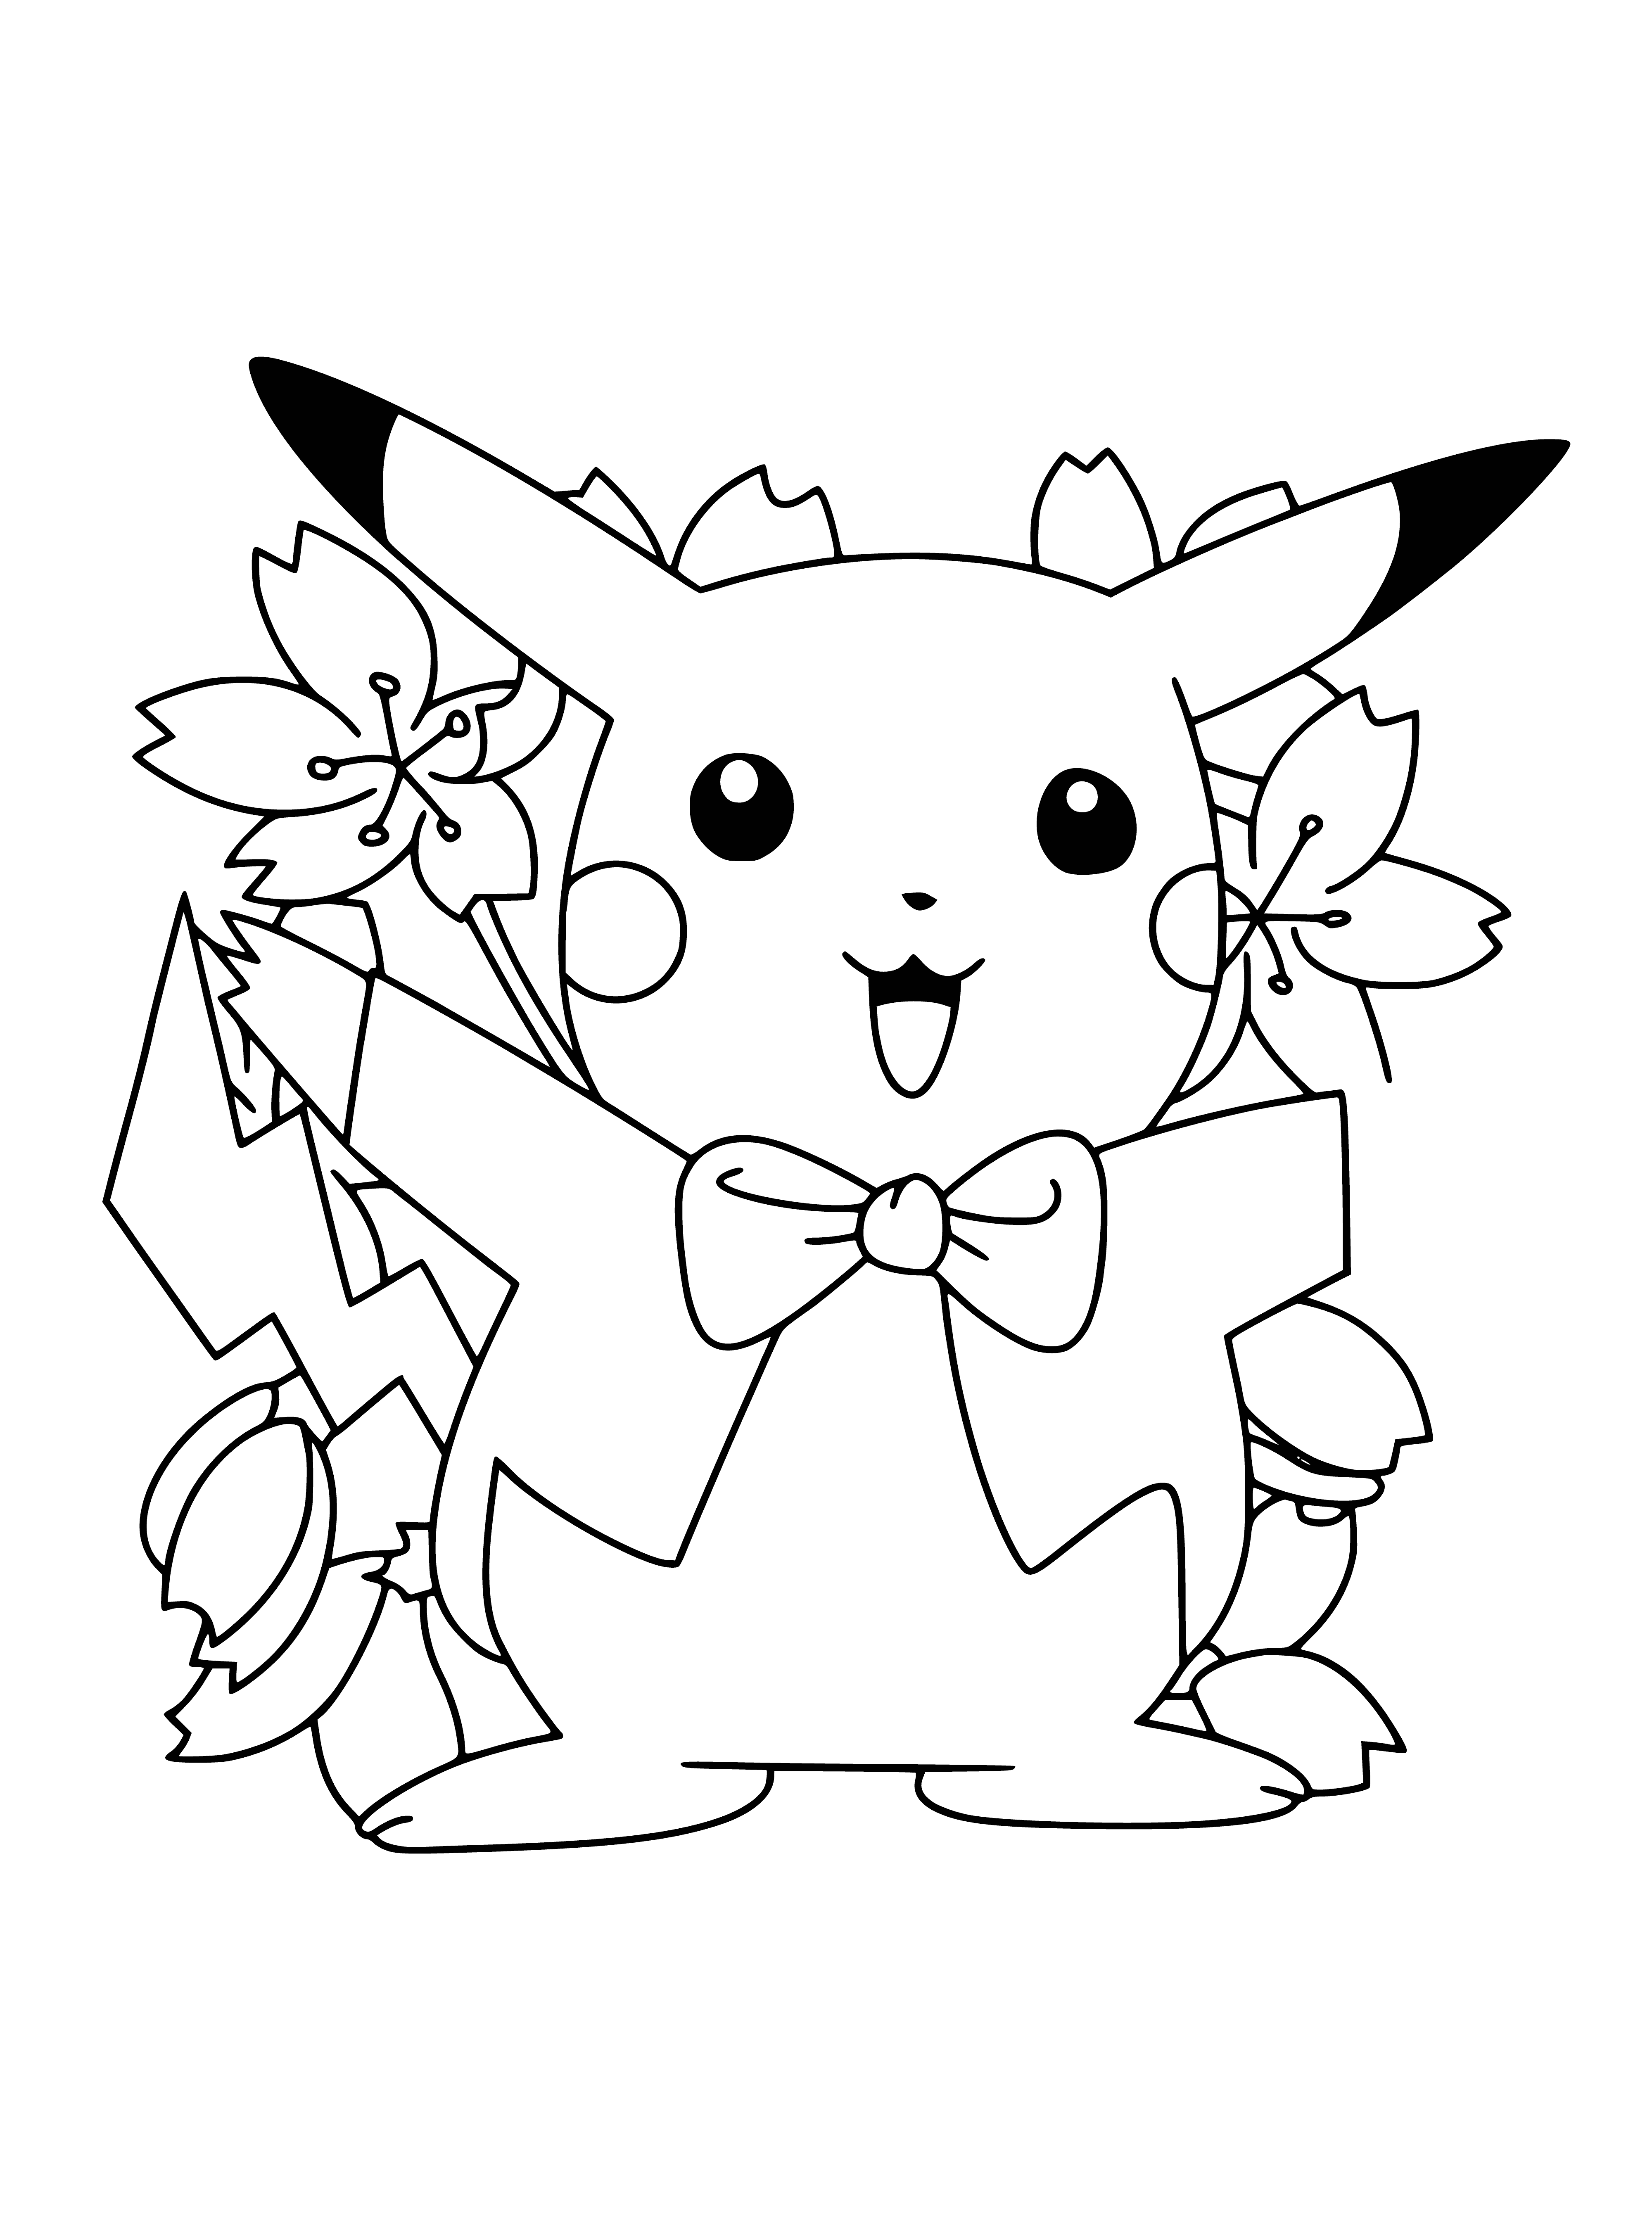 coloring page: Yellow pokemon w/black stripes, invest, pointy tail, red cheeks, long pointy ears.